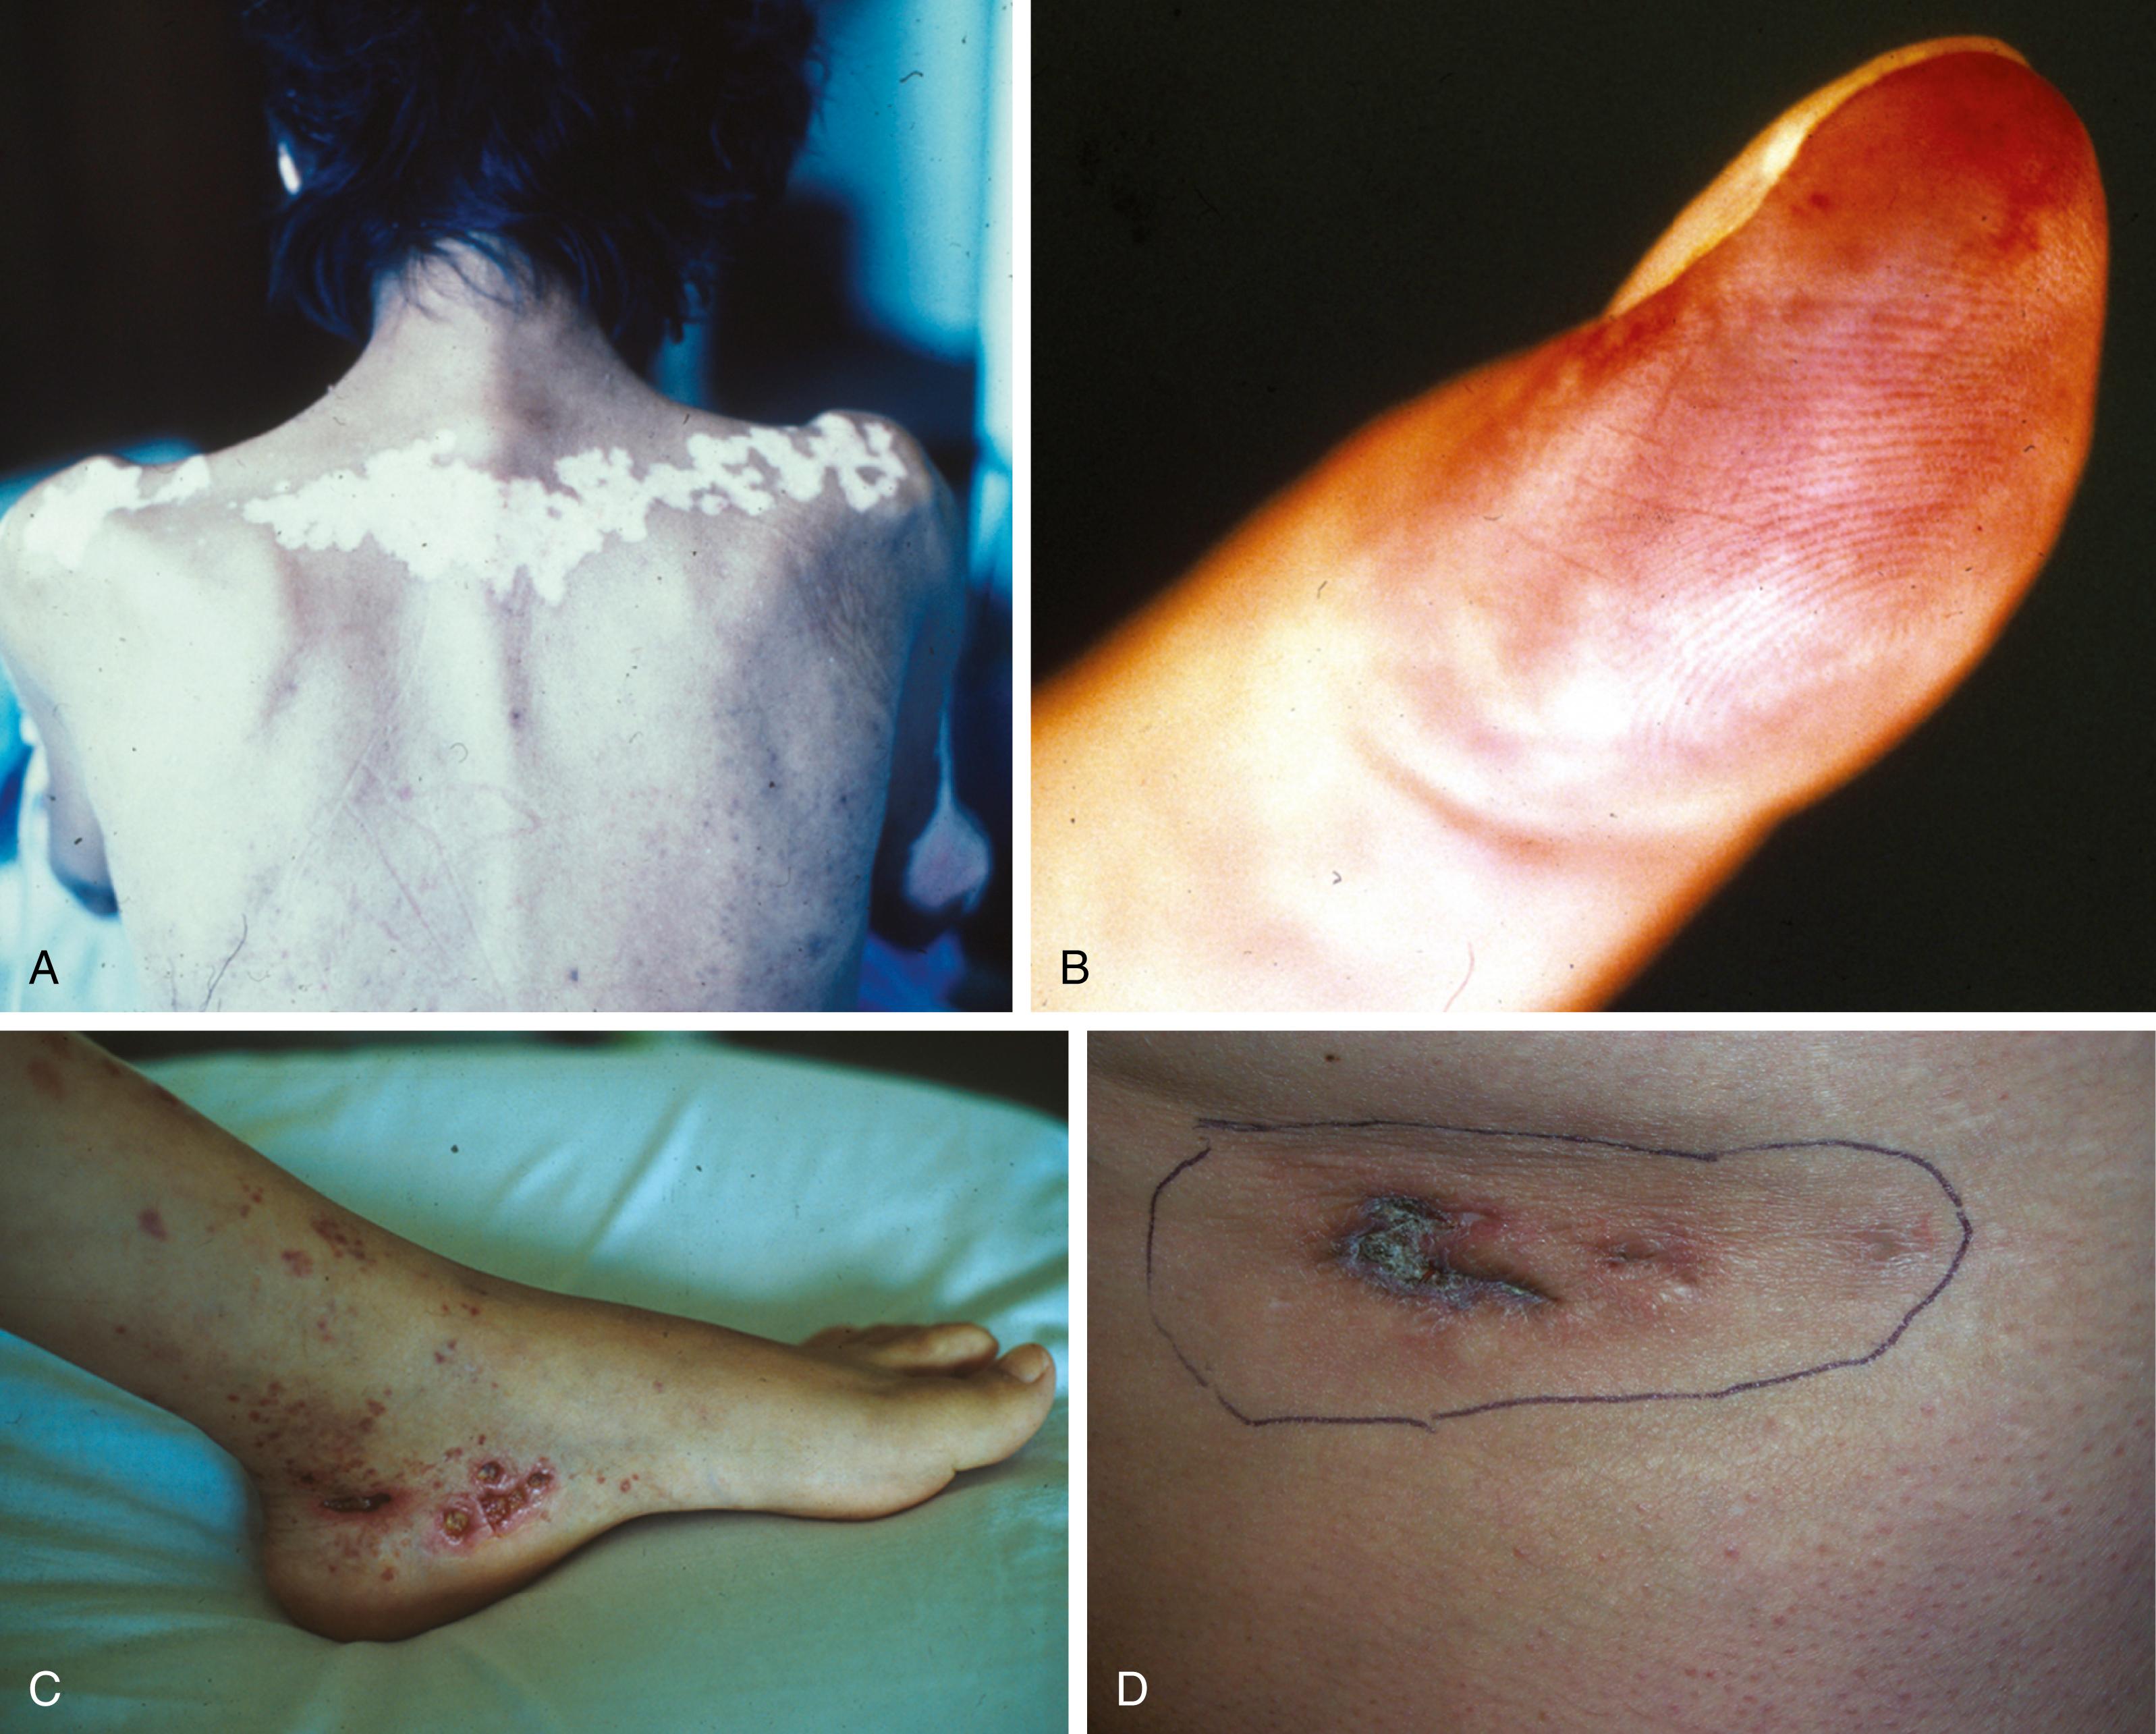 Fig. 53.1, Typical cutaneous lesions in SLE. A, Scarring discoid lesions. B, Finger vasculitis. C, Vasculitis with ulcers. D, Lupus panniculitis.